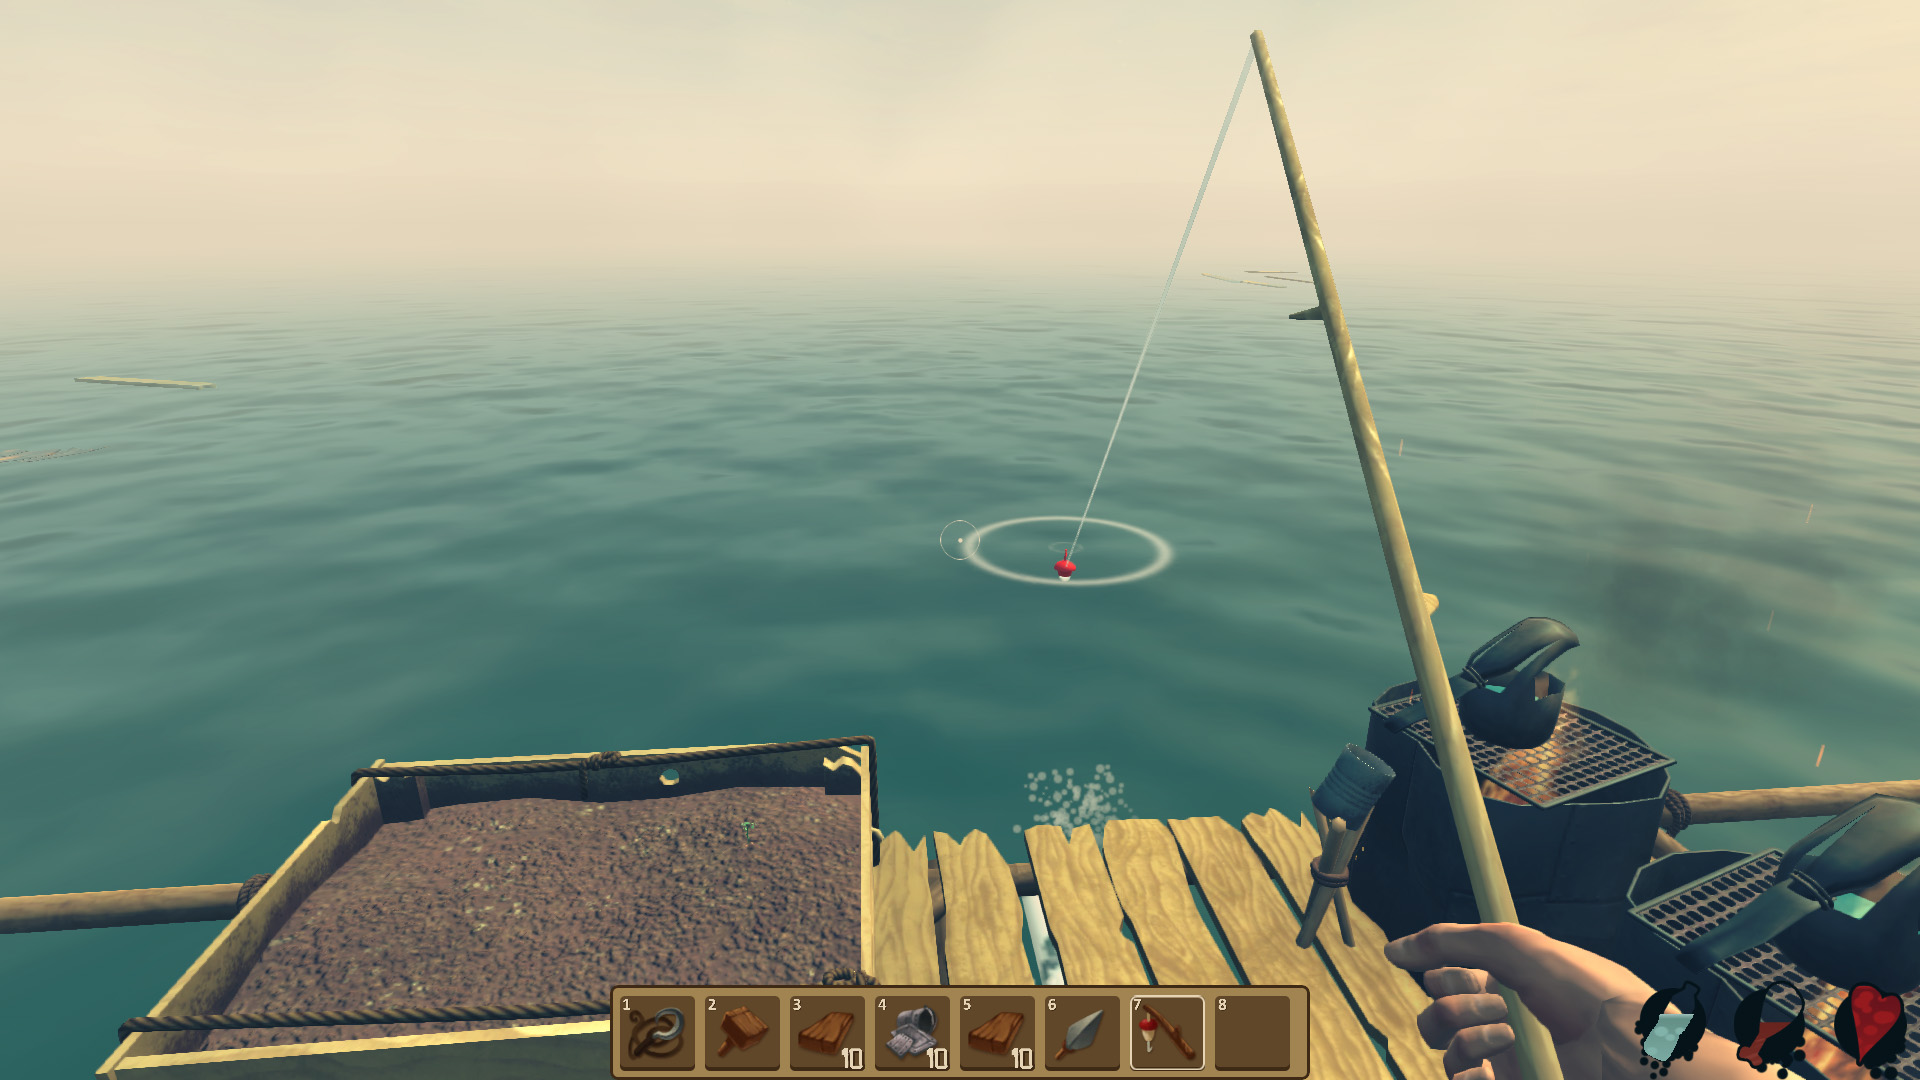 Raft (only for Russian Steam account)